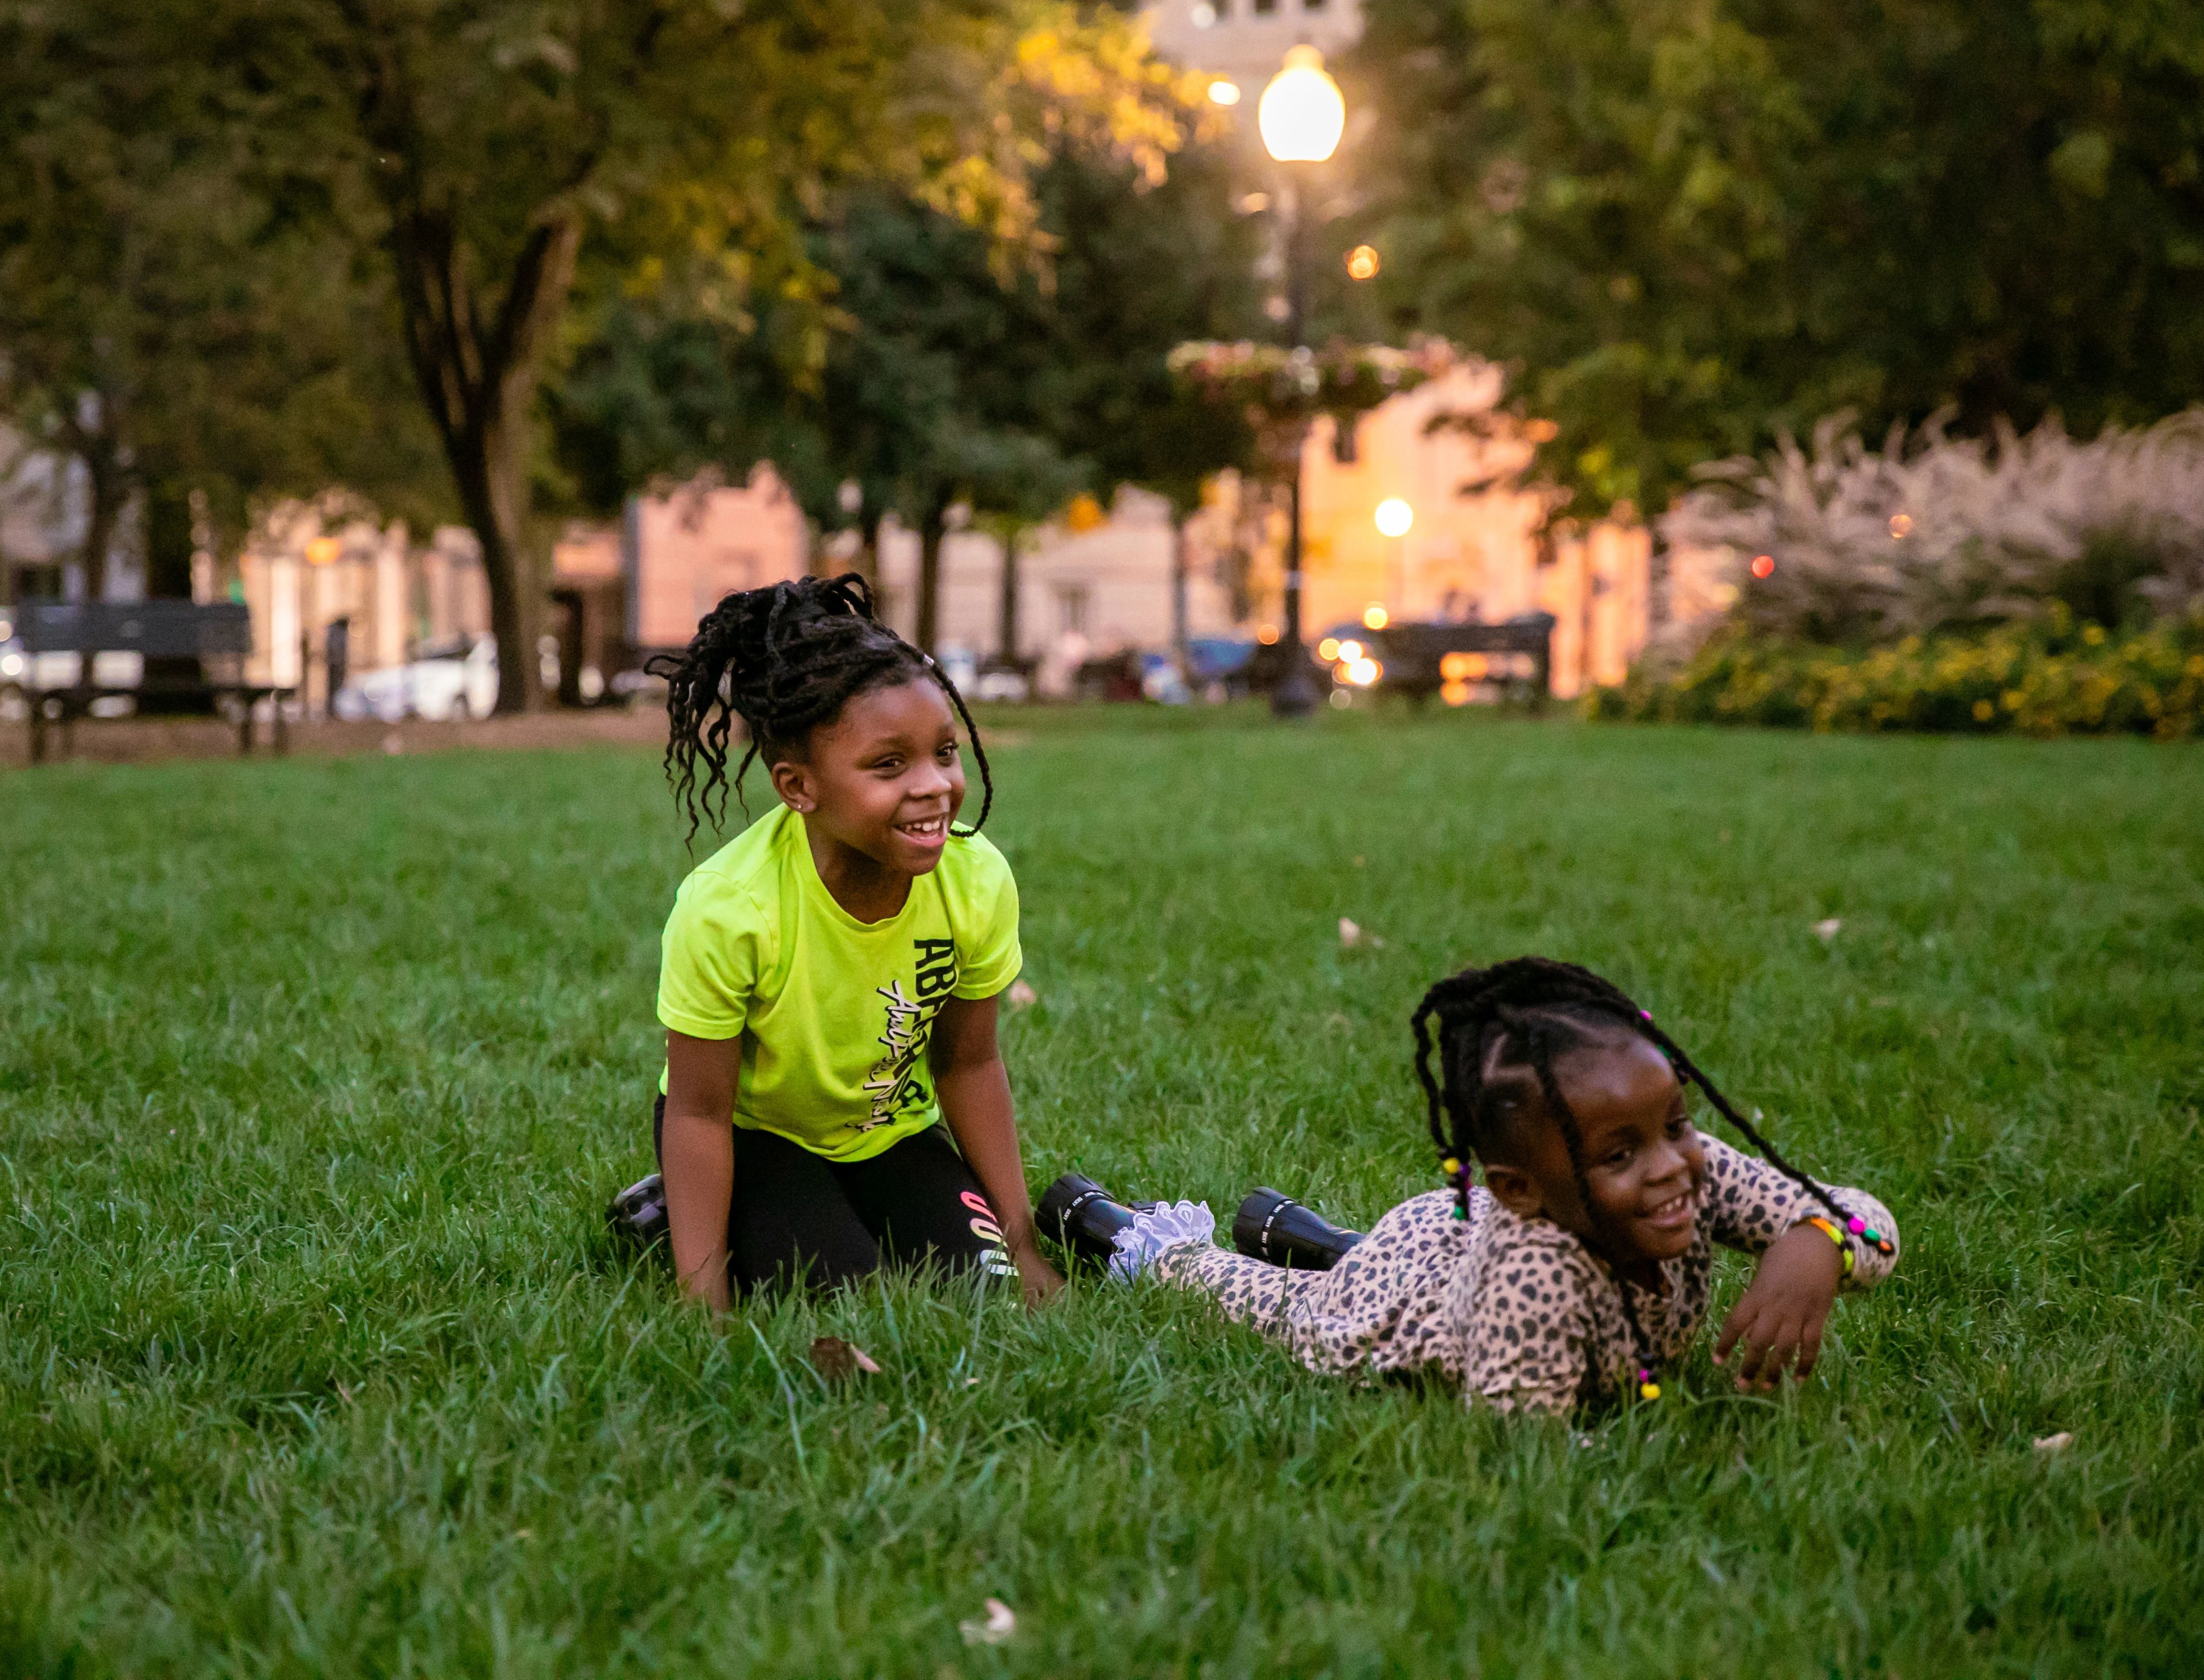 two young black children play on a grass lawn